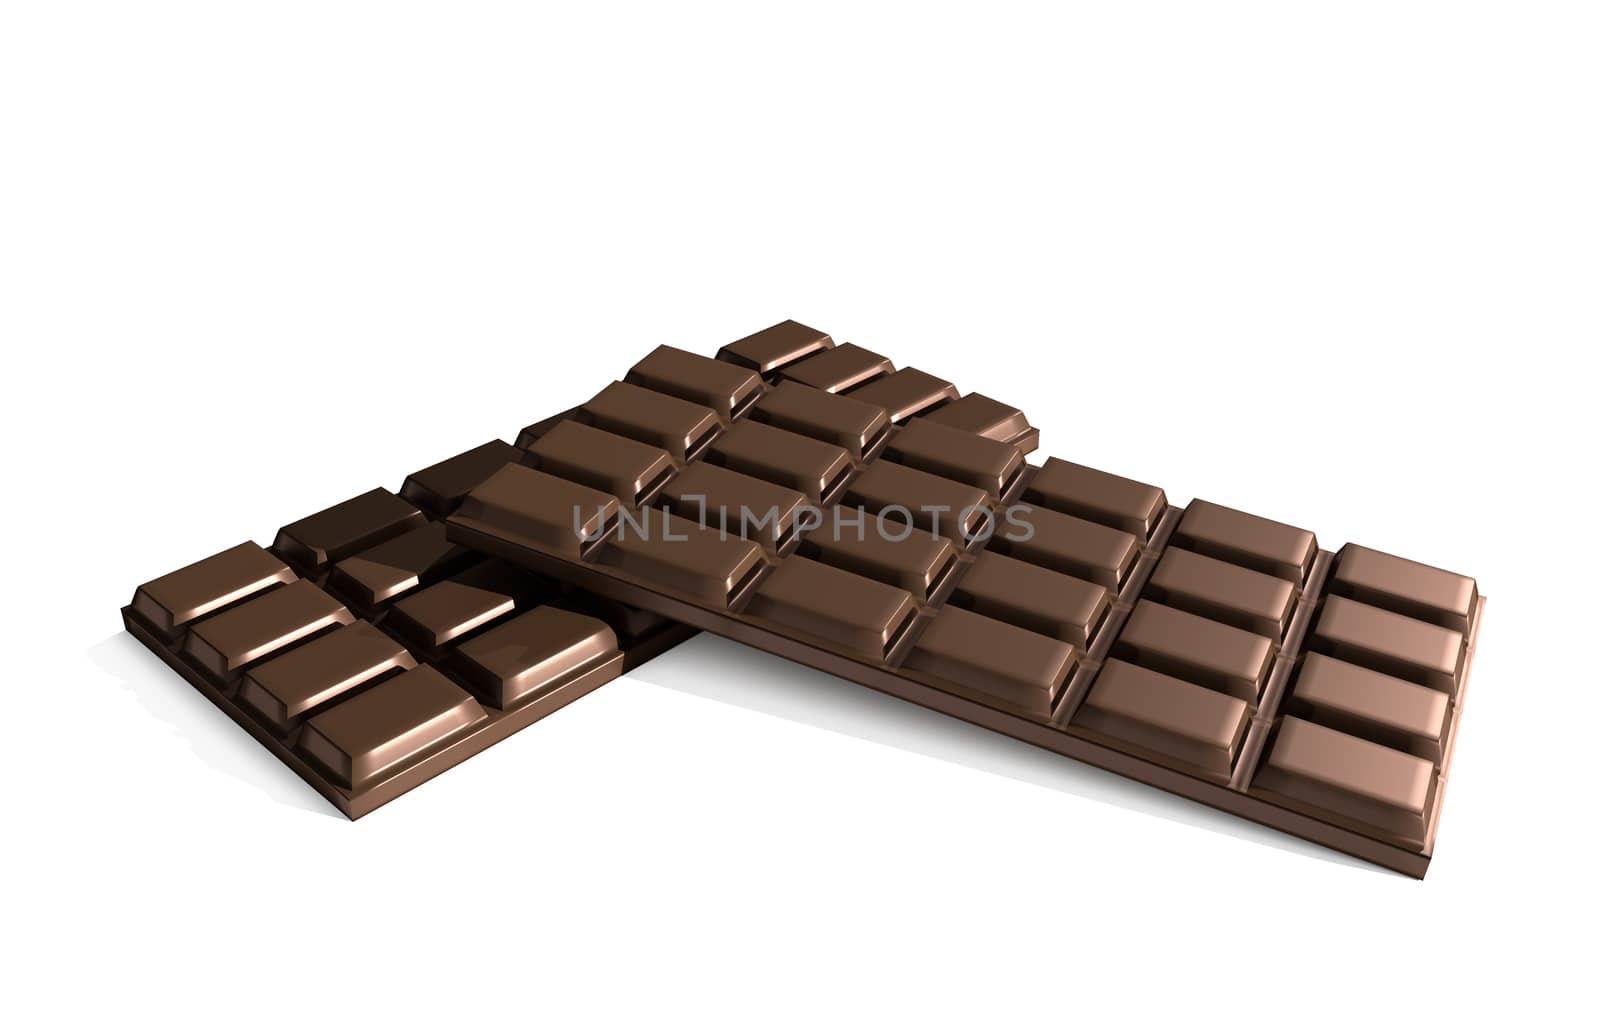 Illustration depicting two chocolate bars arranged over white.